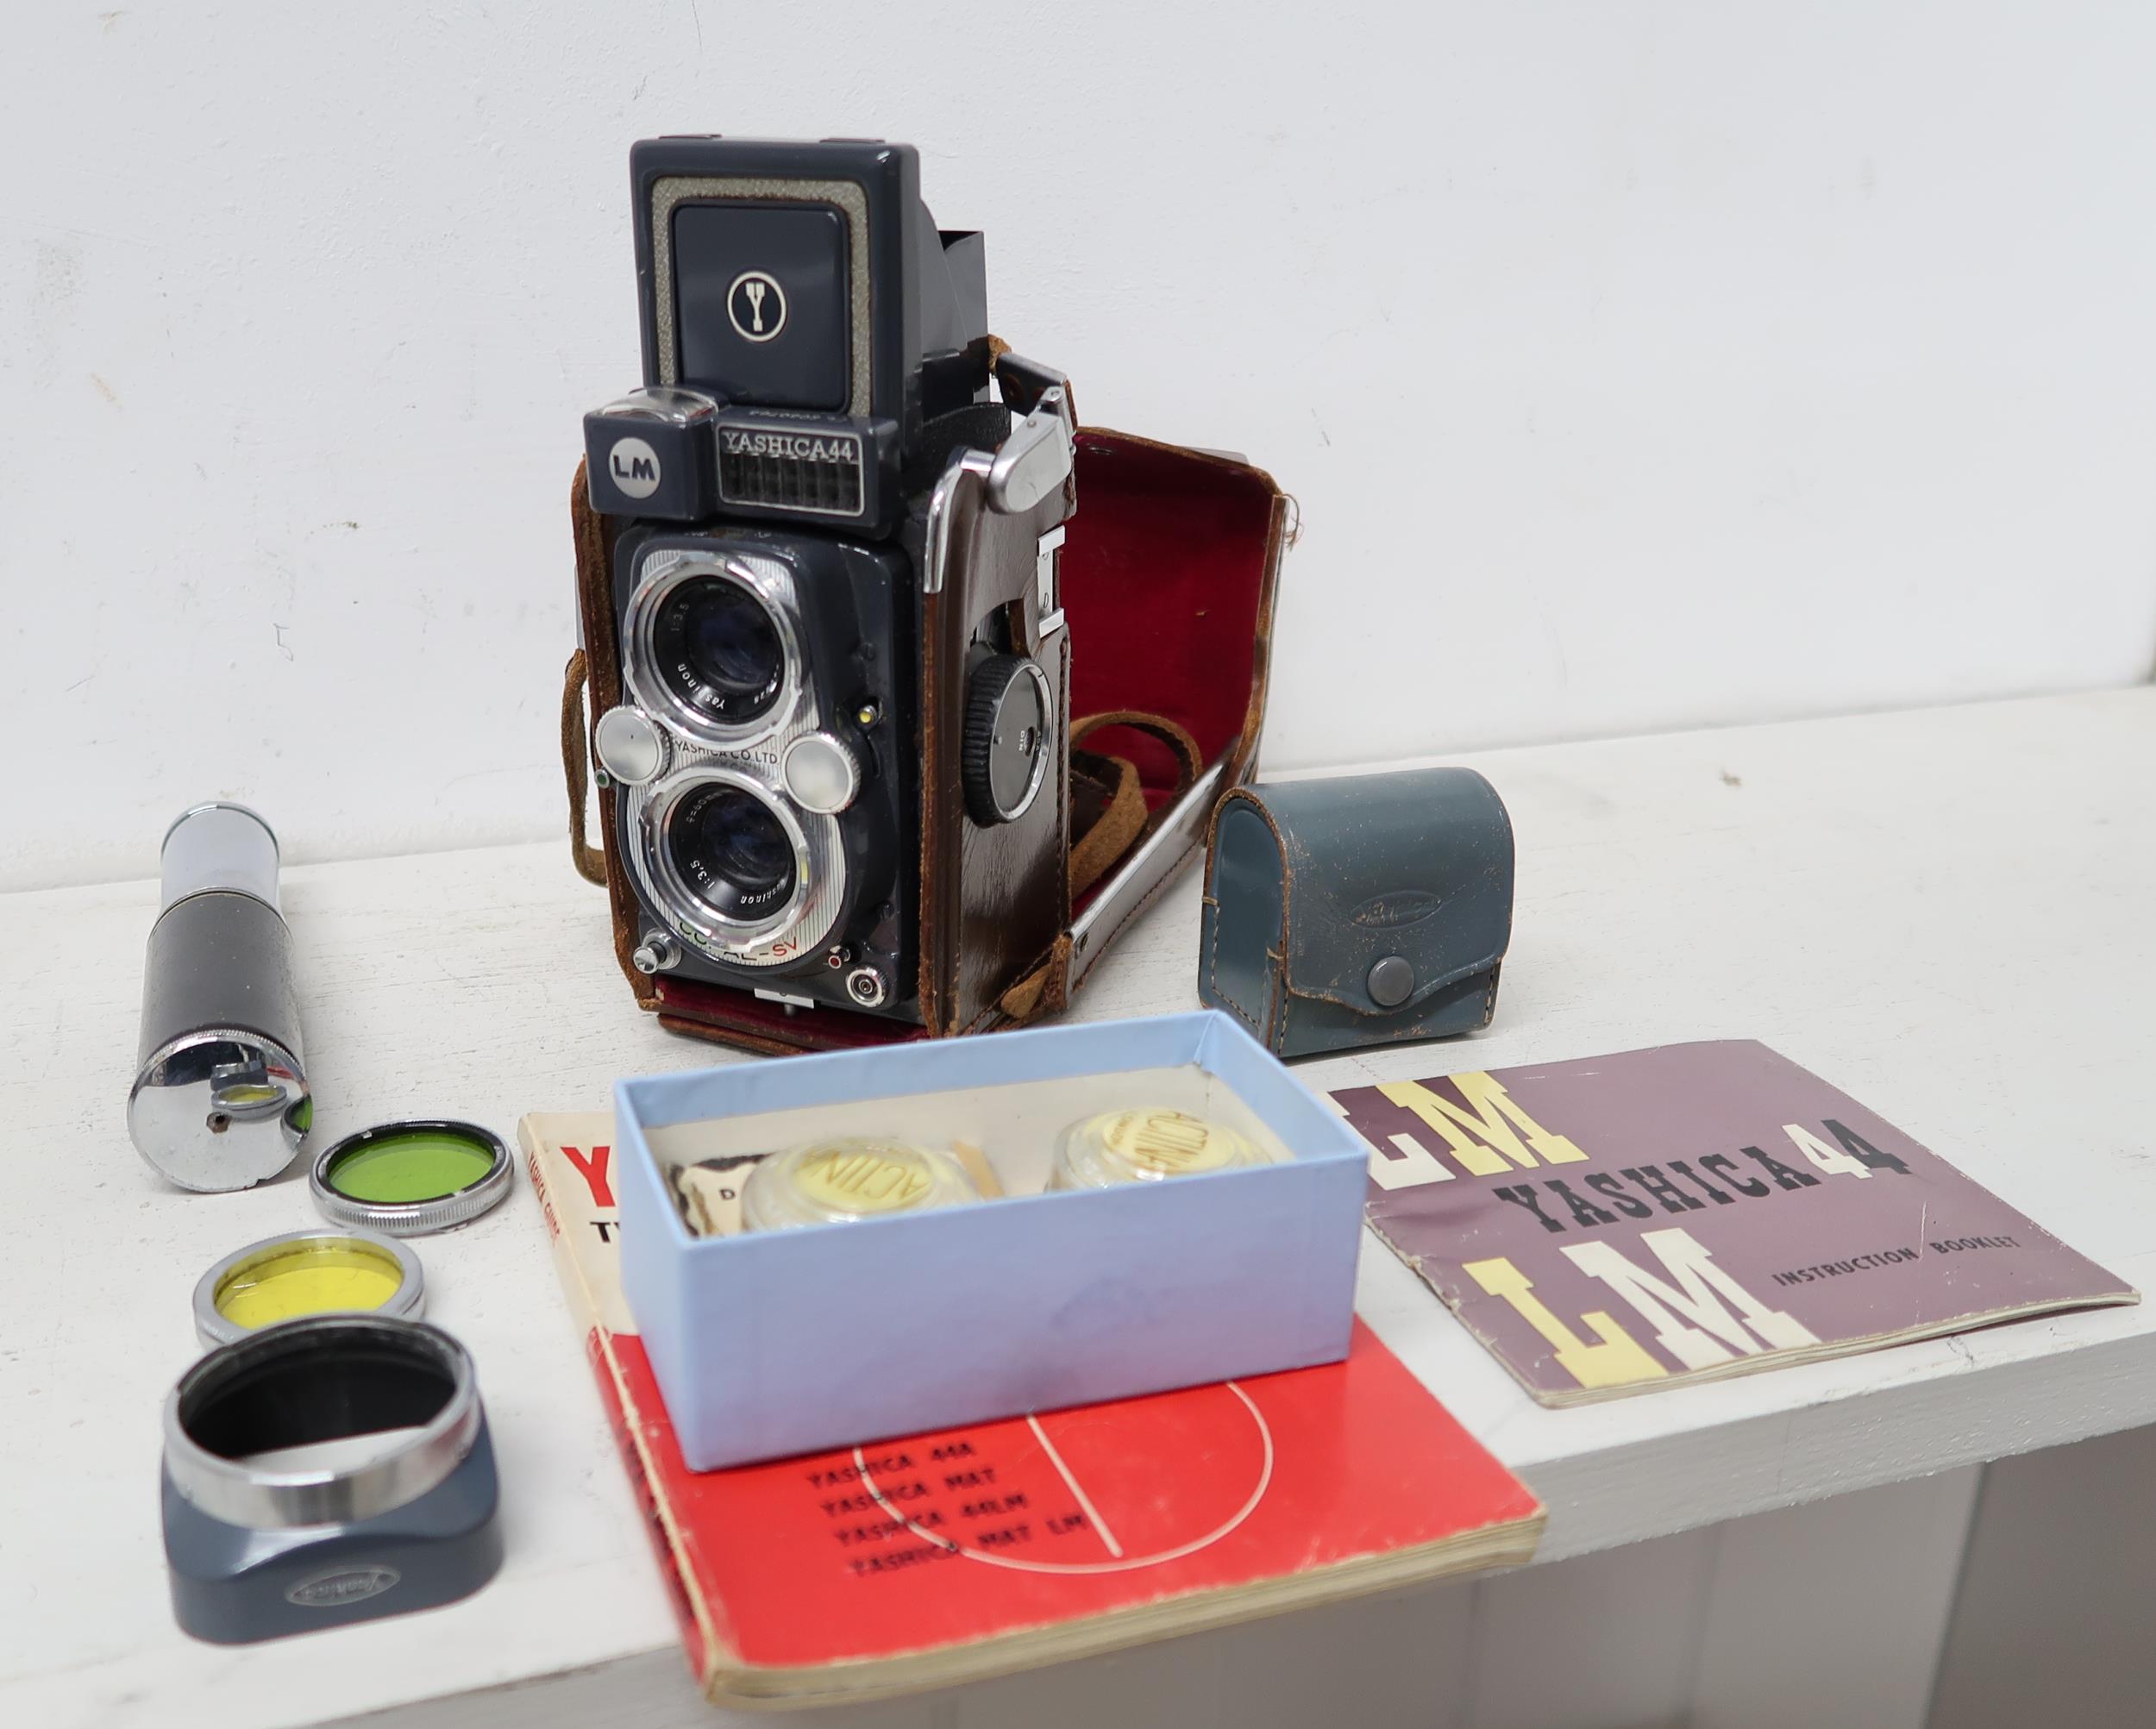 A Yashica 44 camera and assorted lens, booklets etc